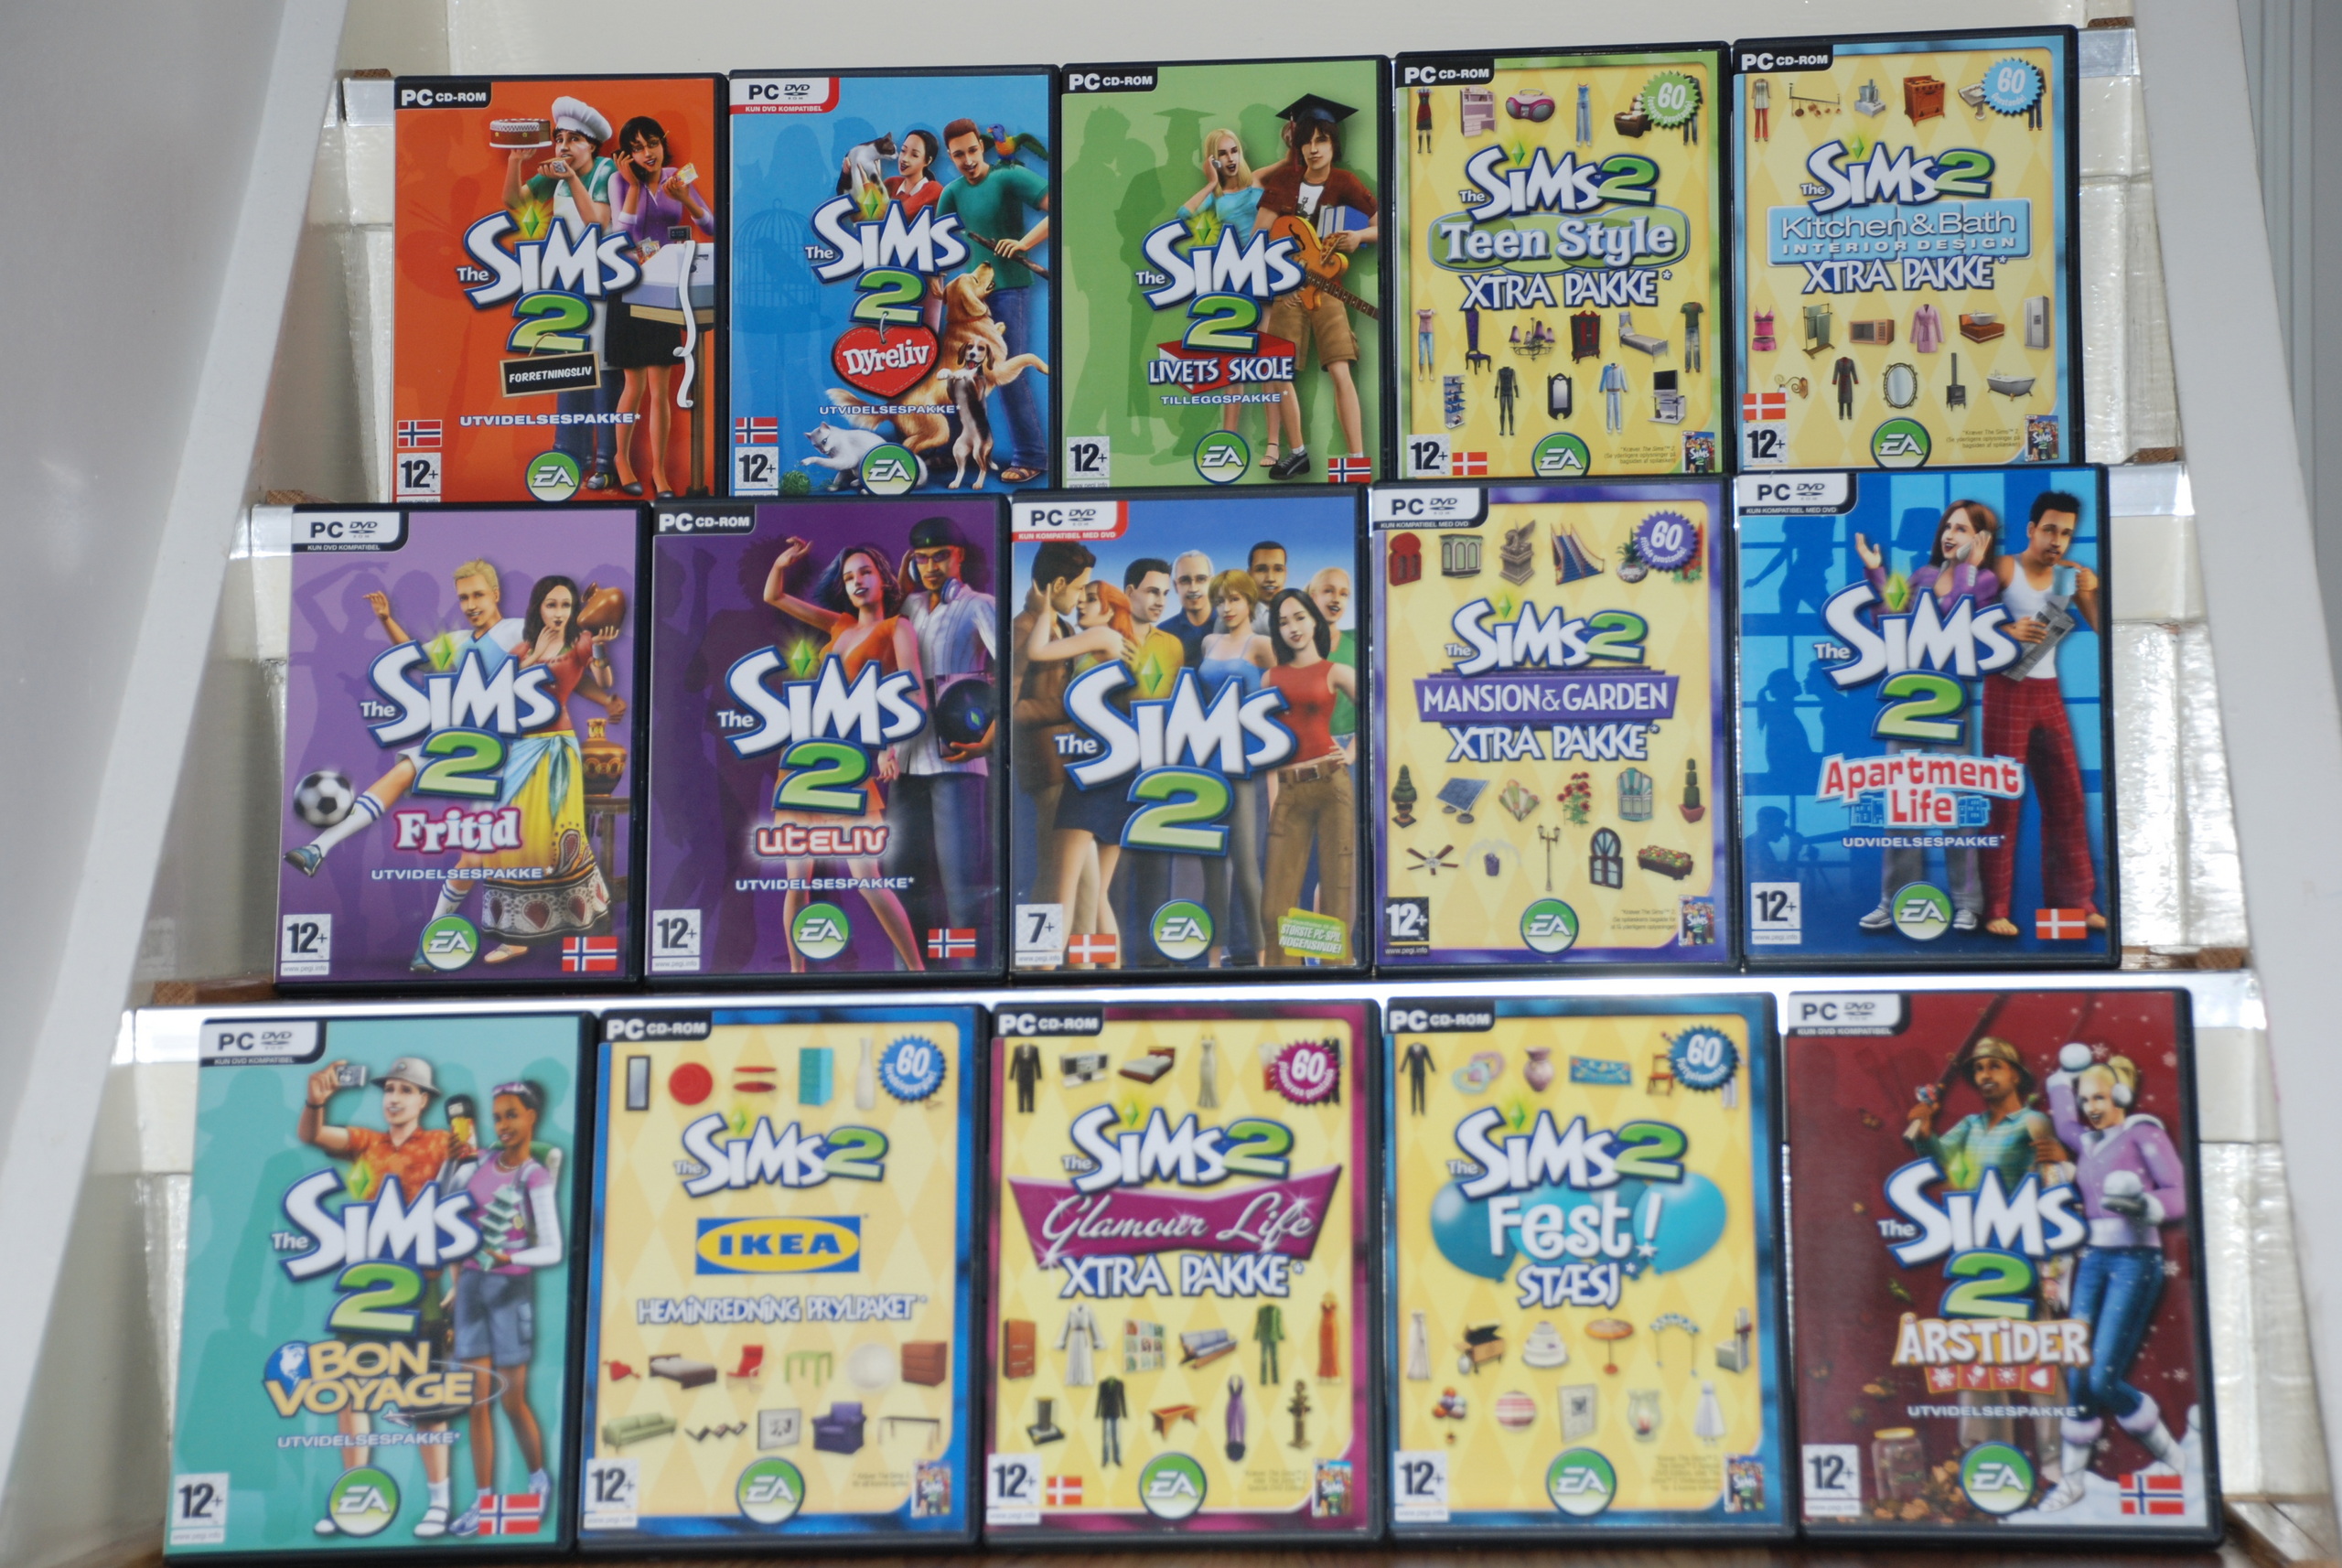 sims 4 free download all expansions